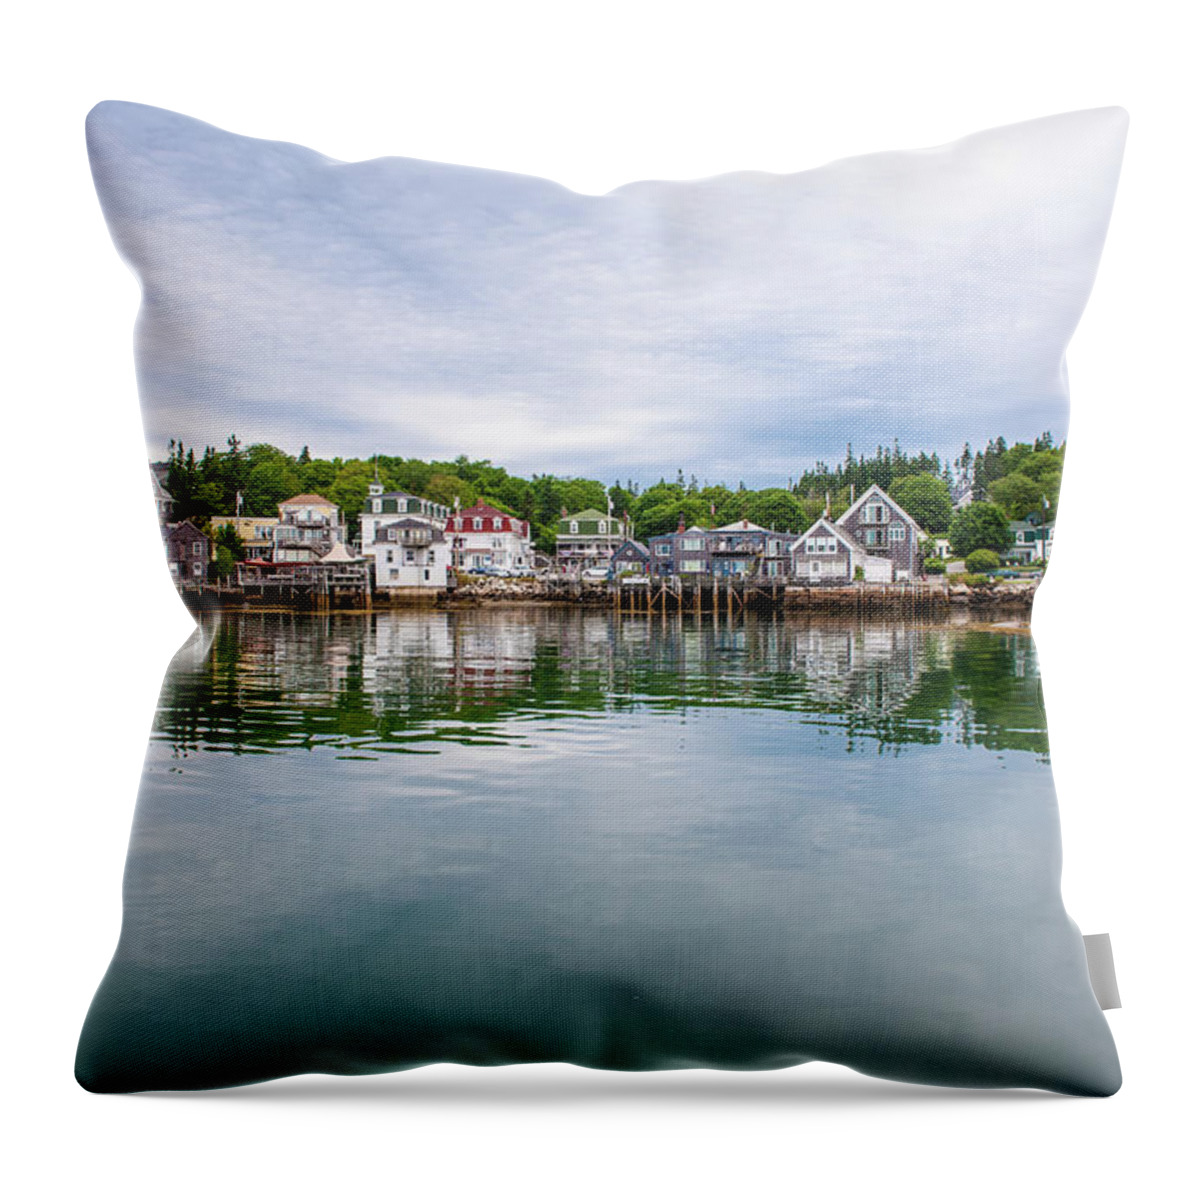 Town Throw Pillow featuring the photograph Island Village by Edwin Remsberg